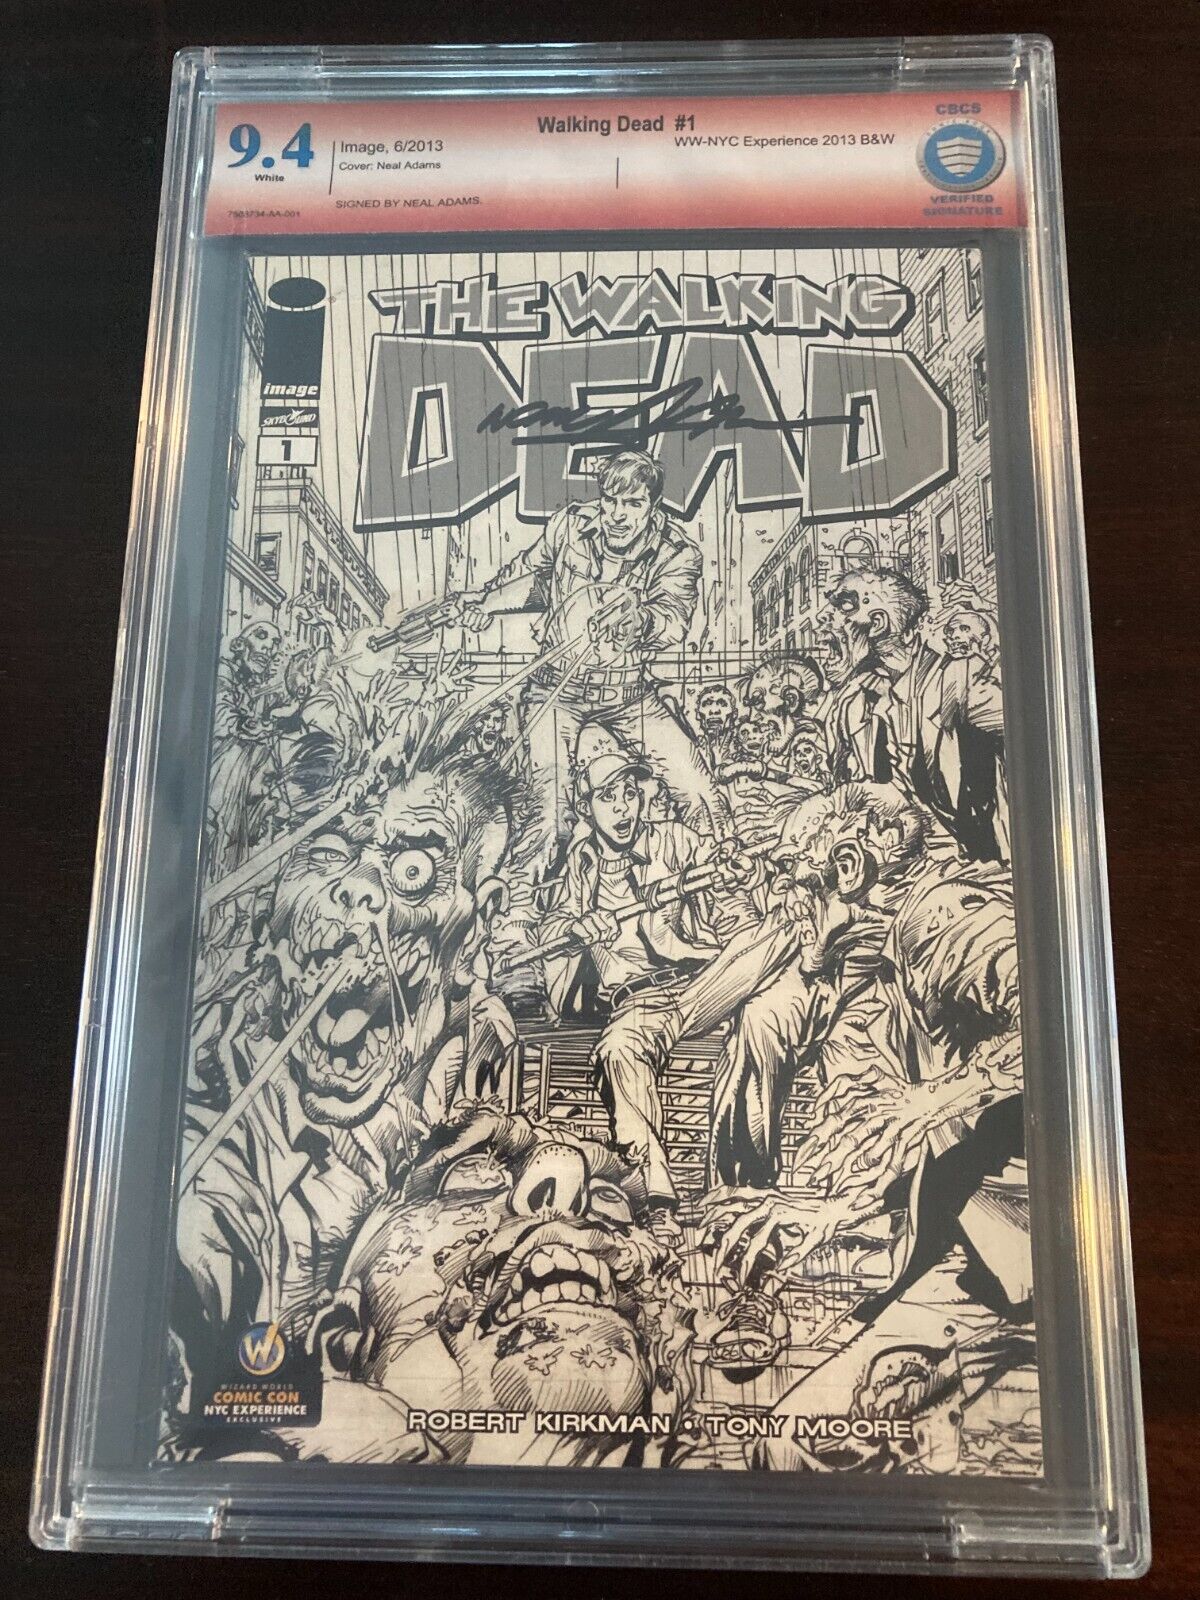 The Walking Dead #1, B&W Variant, Signed by Neal Adams, with 9.4 CBCS Grade